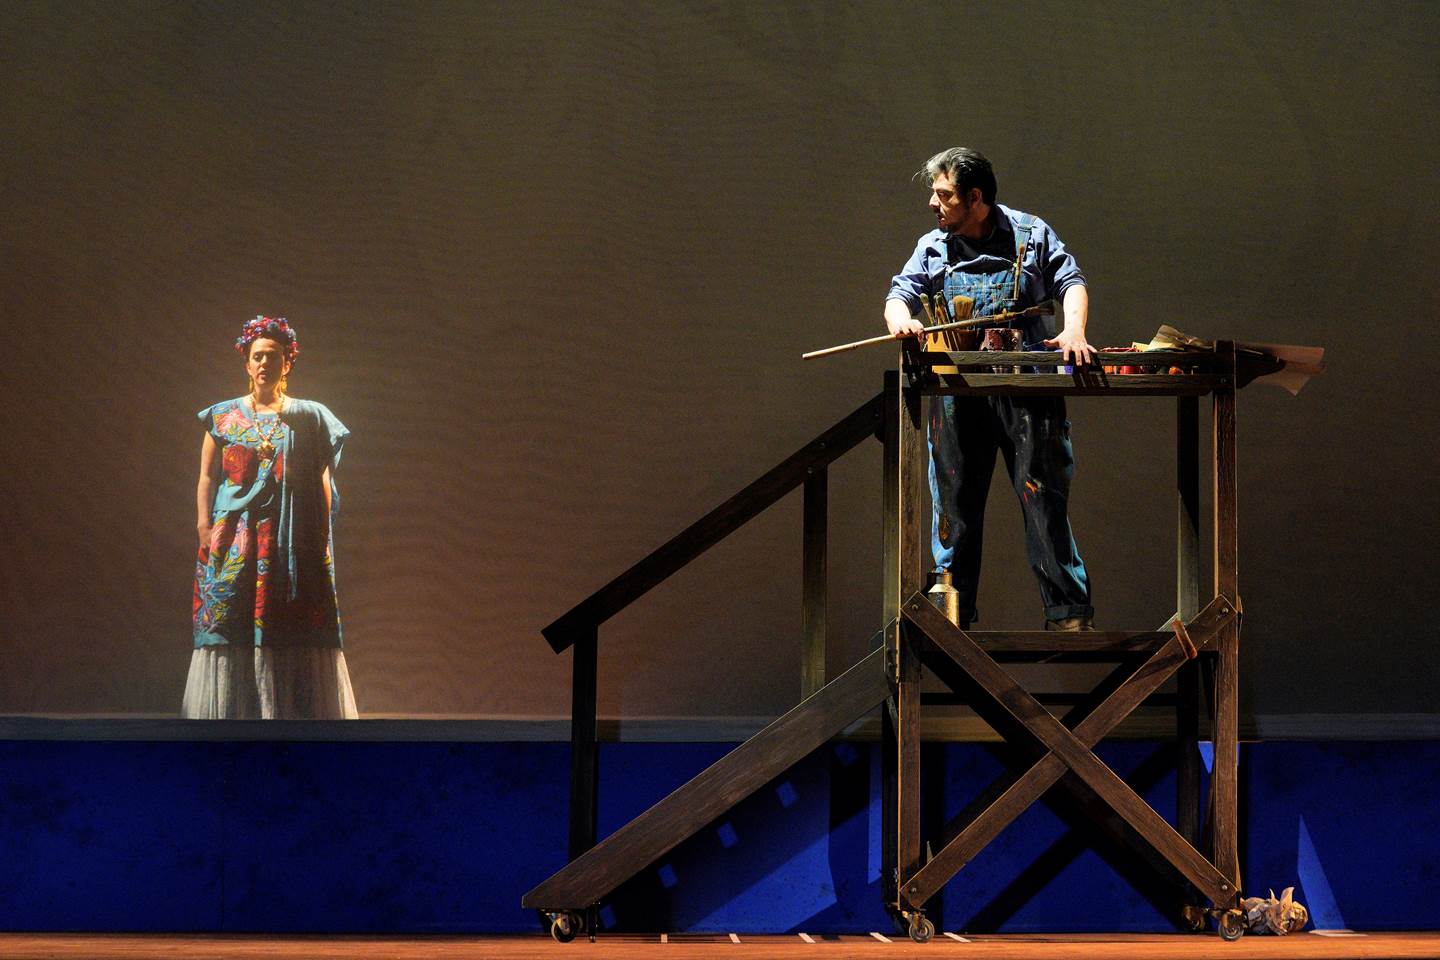 Scene from Frida of man in overalls with paint material standing on stairs looking at a woman in a colorful dress